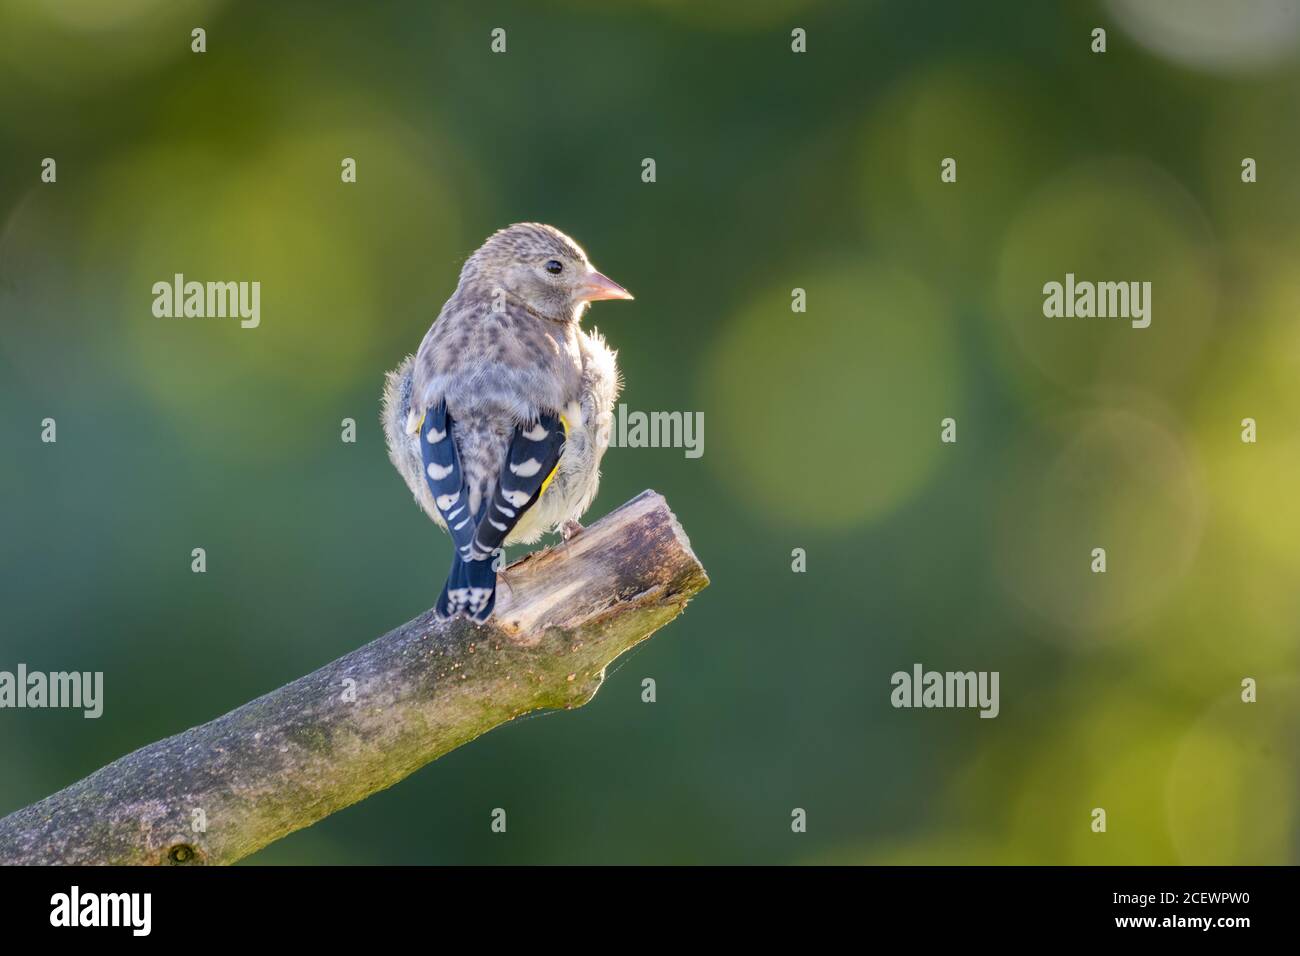 Juvenile Goldfinch(Carduelis carduelis) perched on a twig Stock Photo